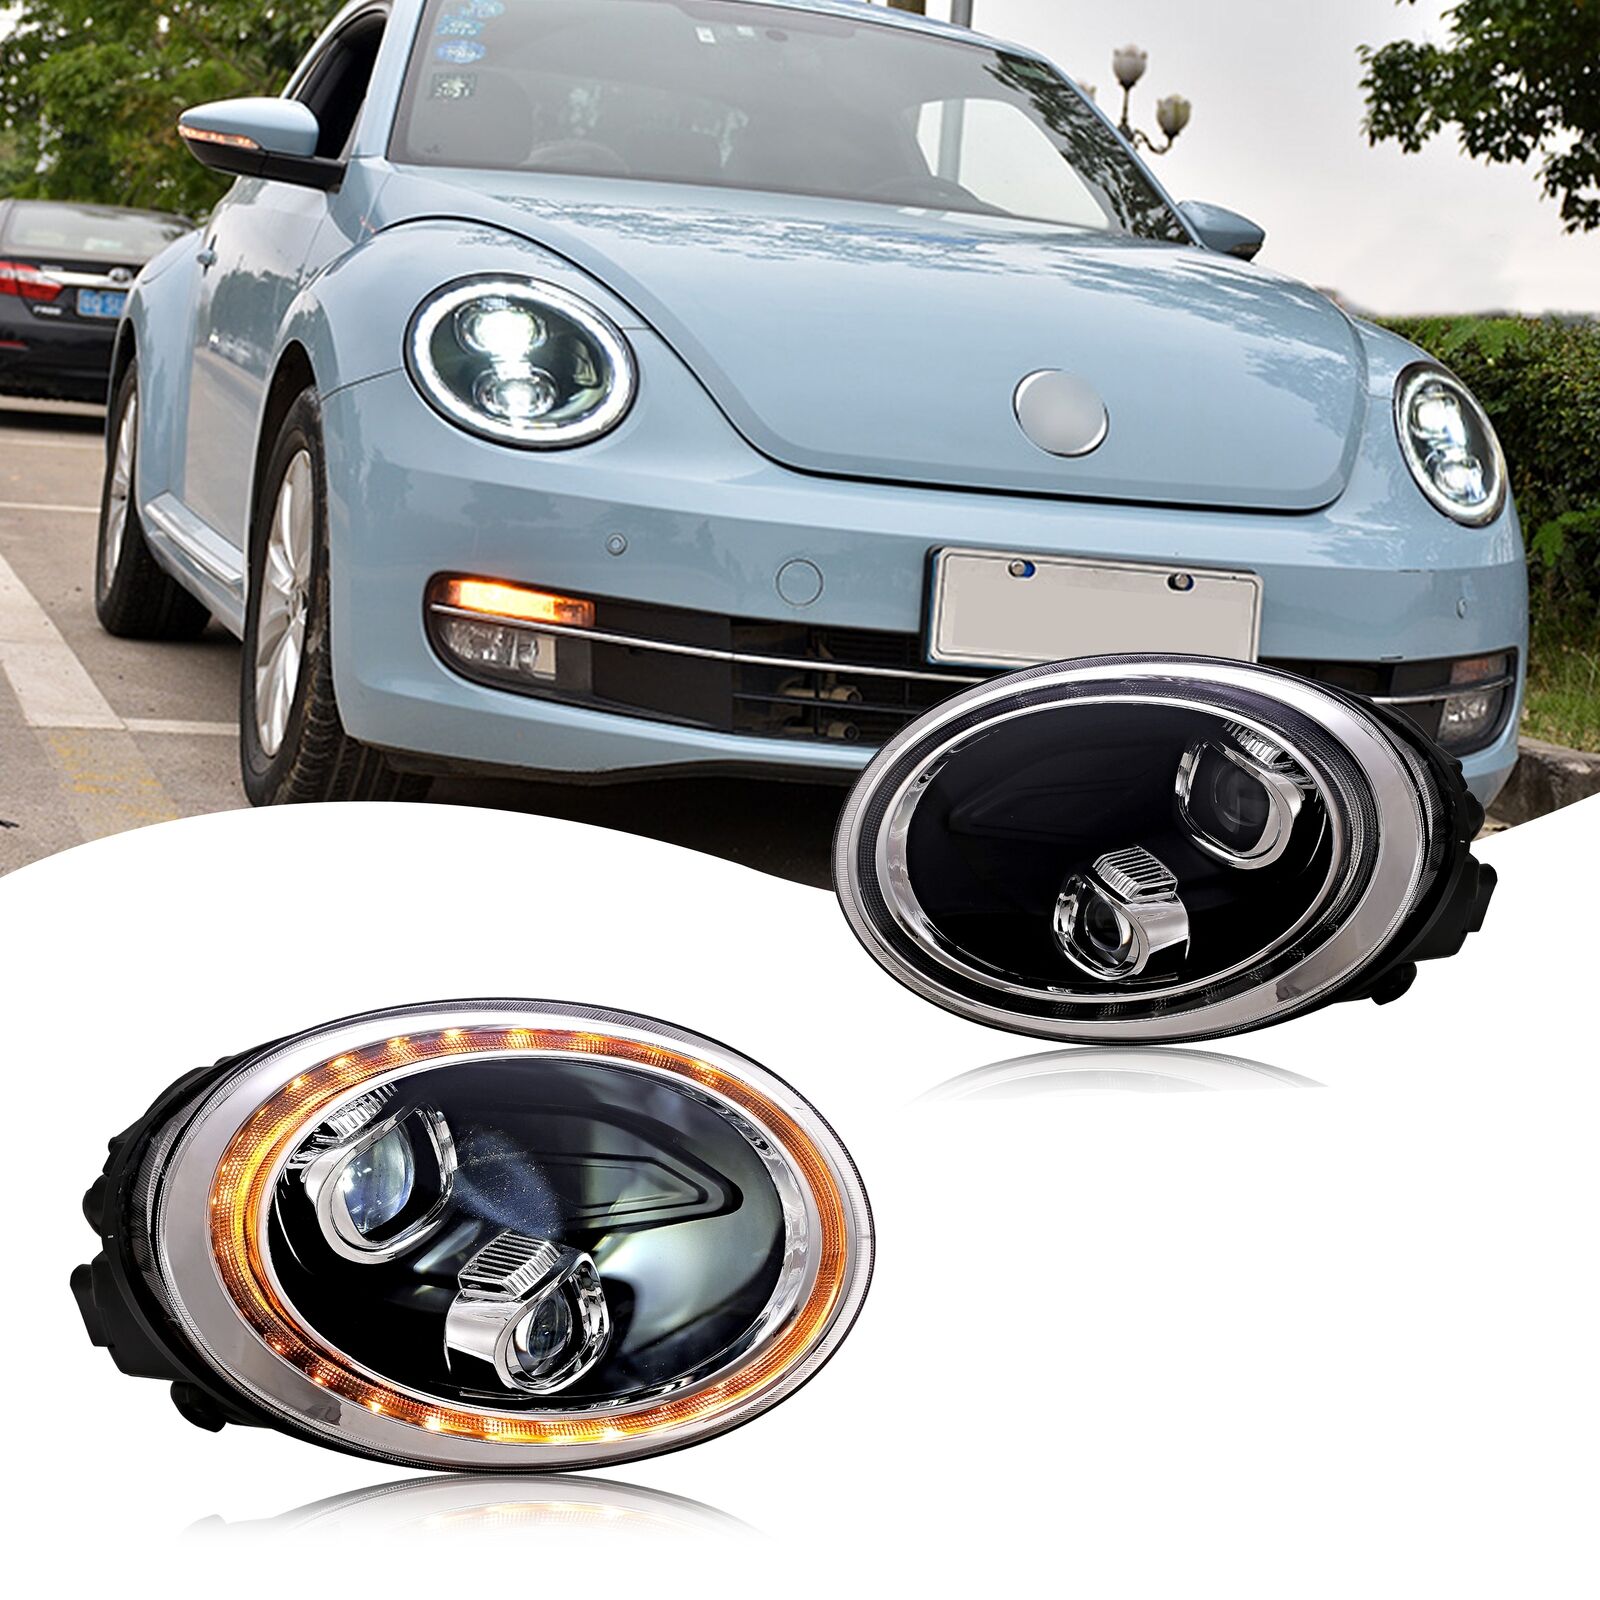 LED Sequential Headlights For Volkswagen VW Beetle 2013-2019 Front Lamps